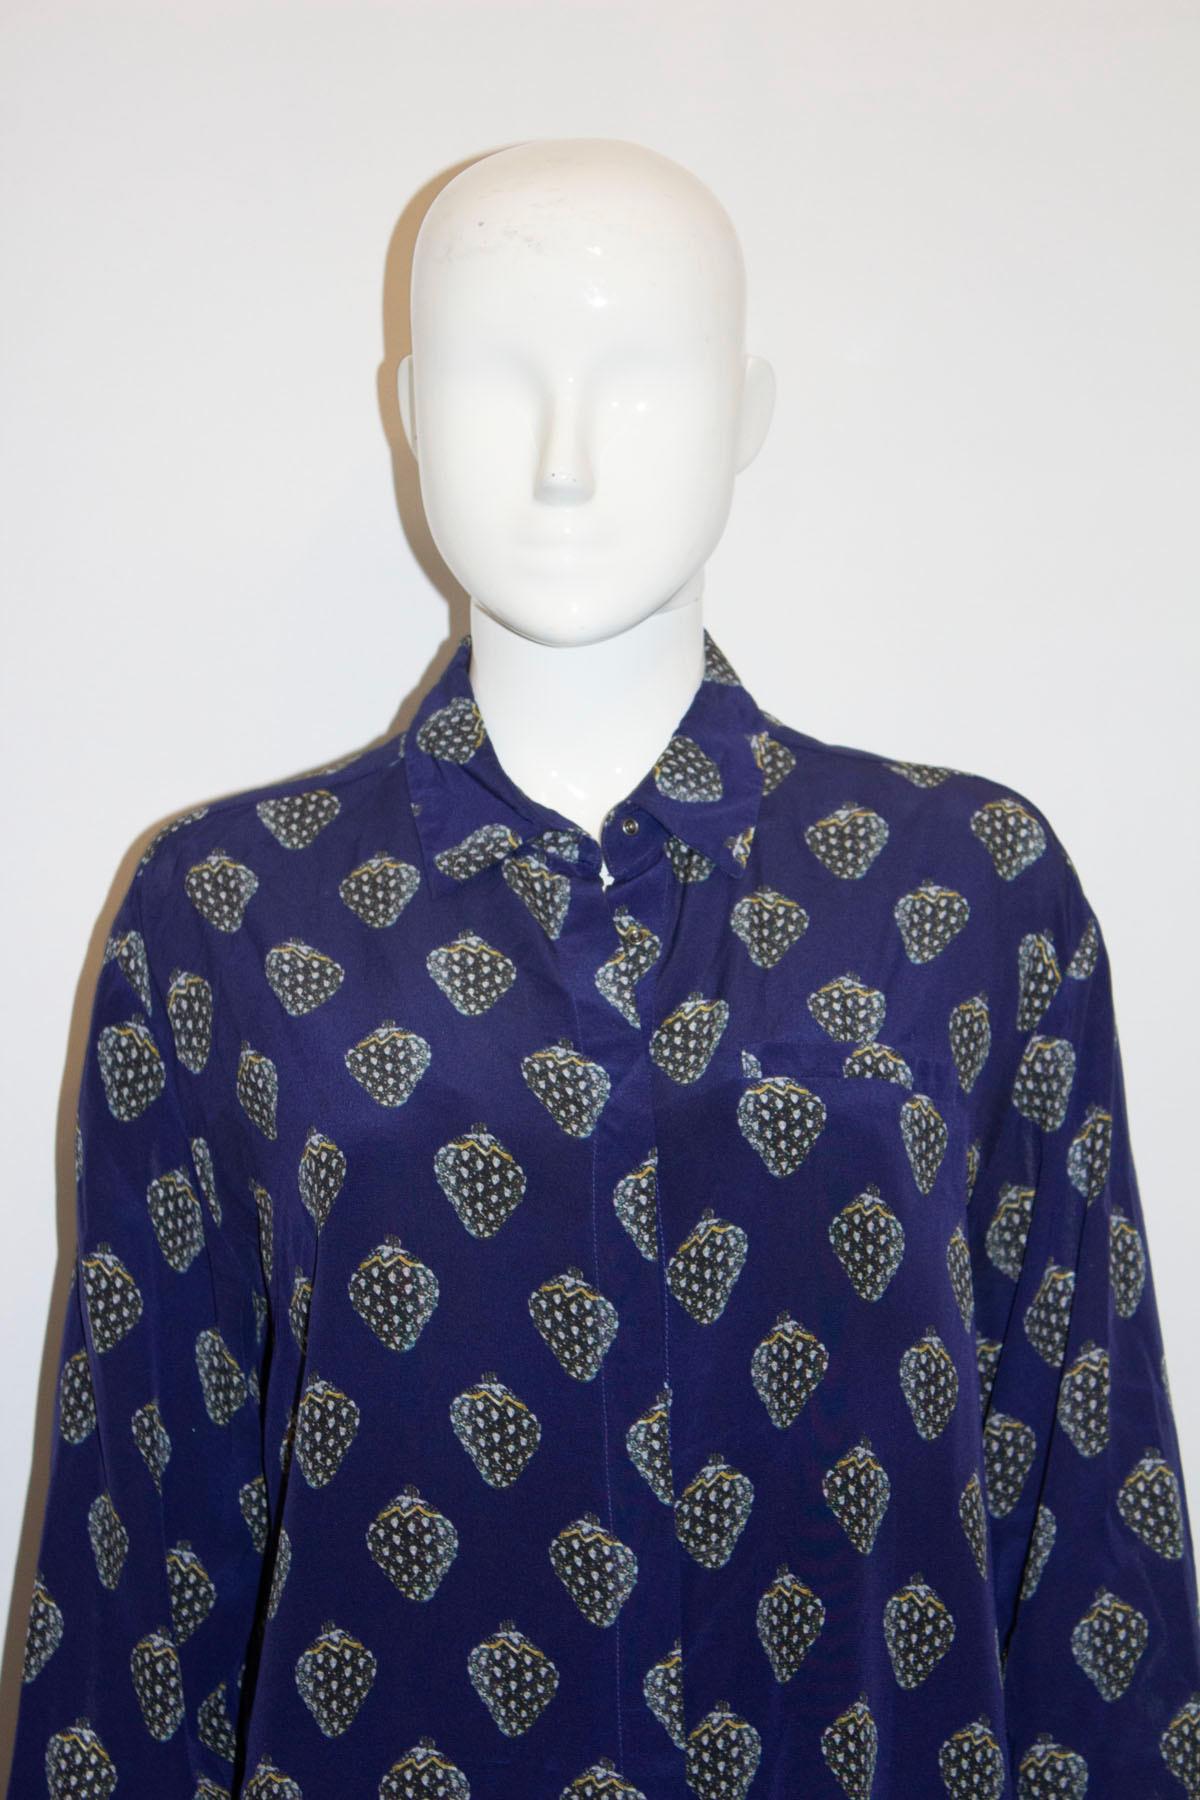 Women's or Men's Blue Silk Shirt with Strawberry Print by Markus Lupfer For Sale